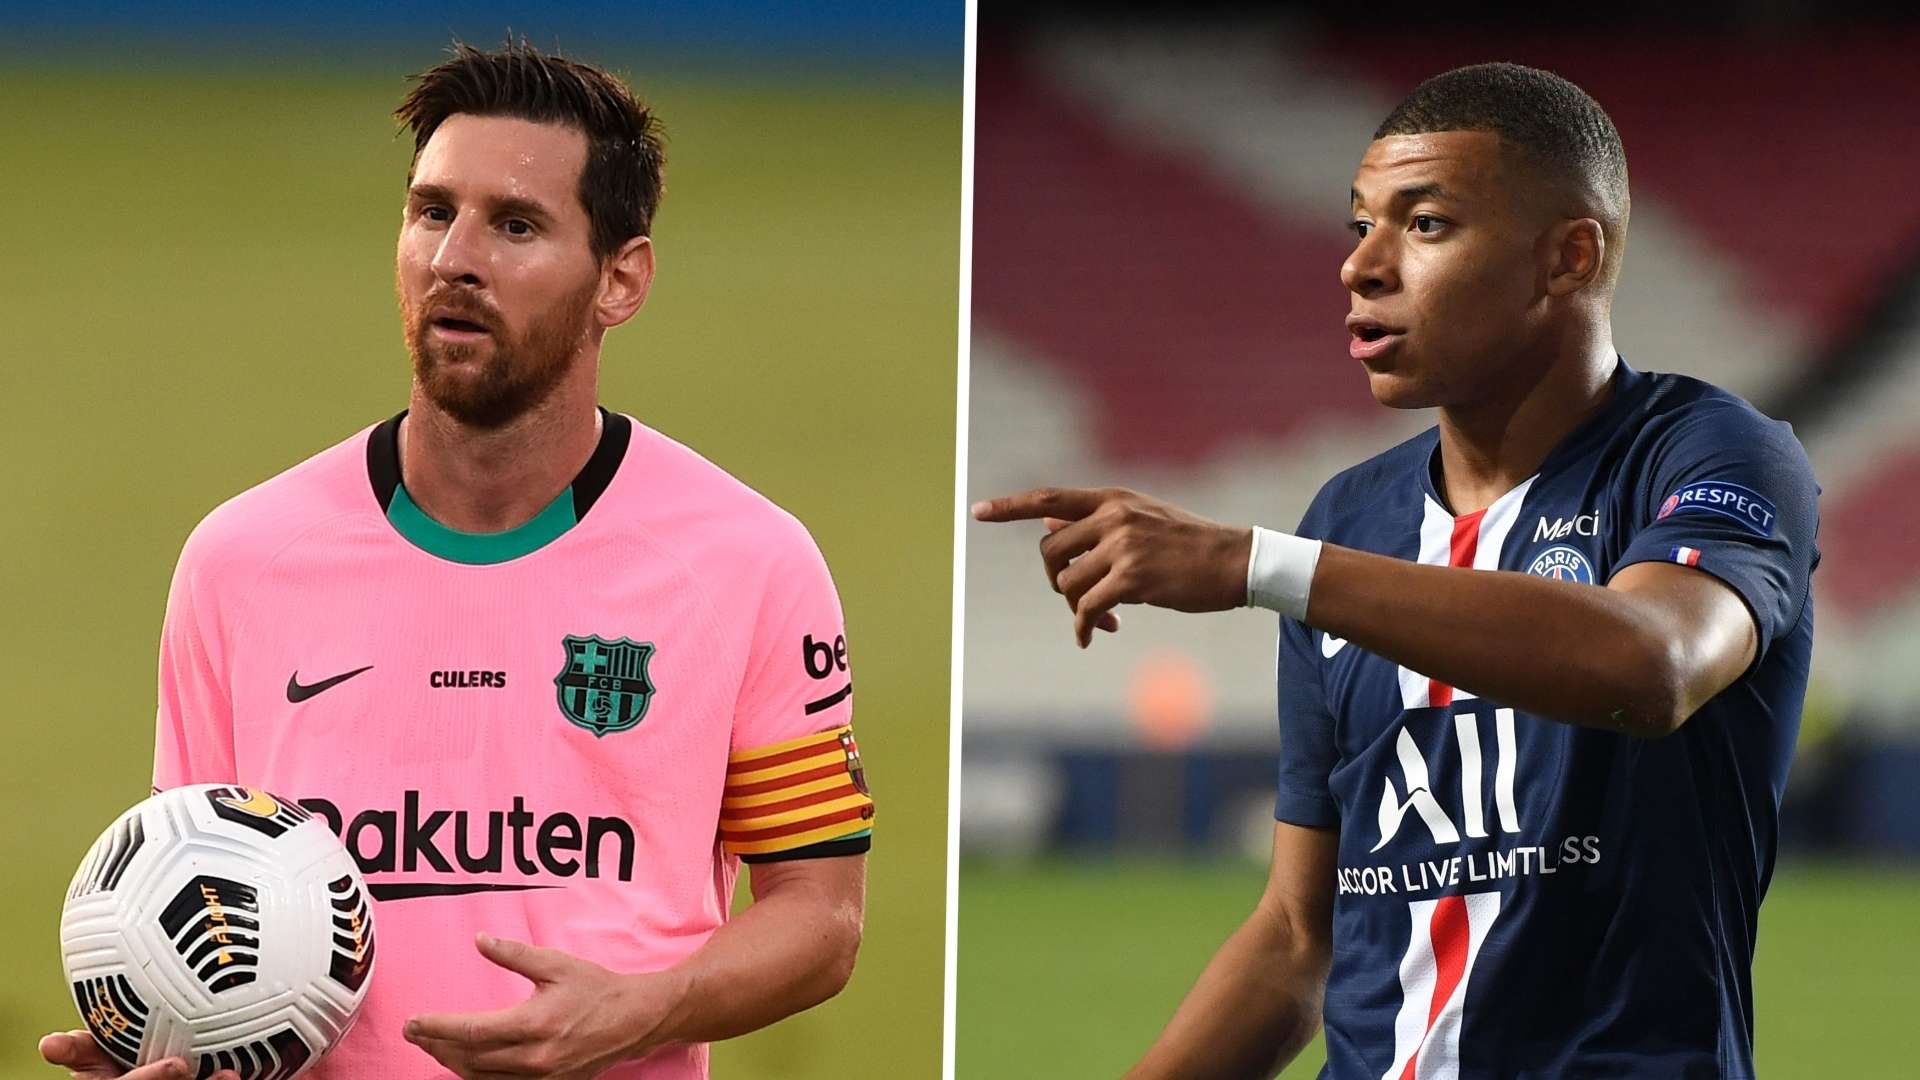 Lionel Messi Kylian Mbappe 2020